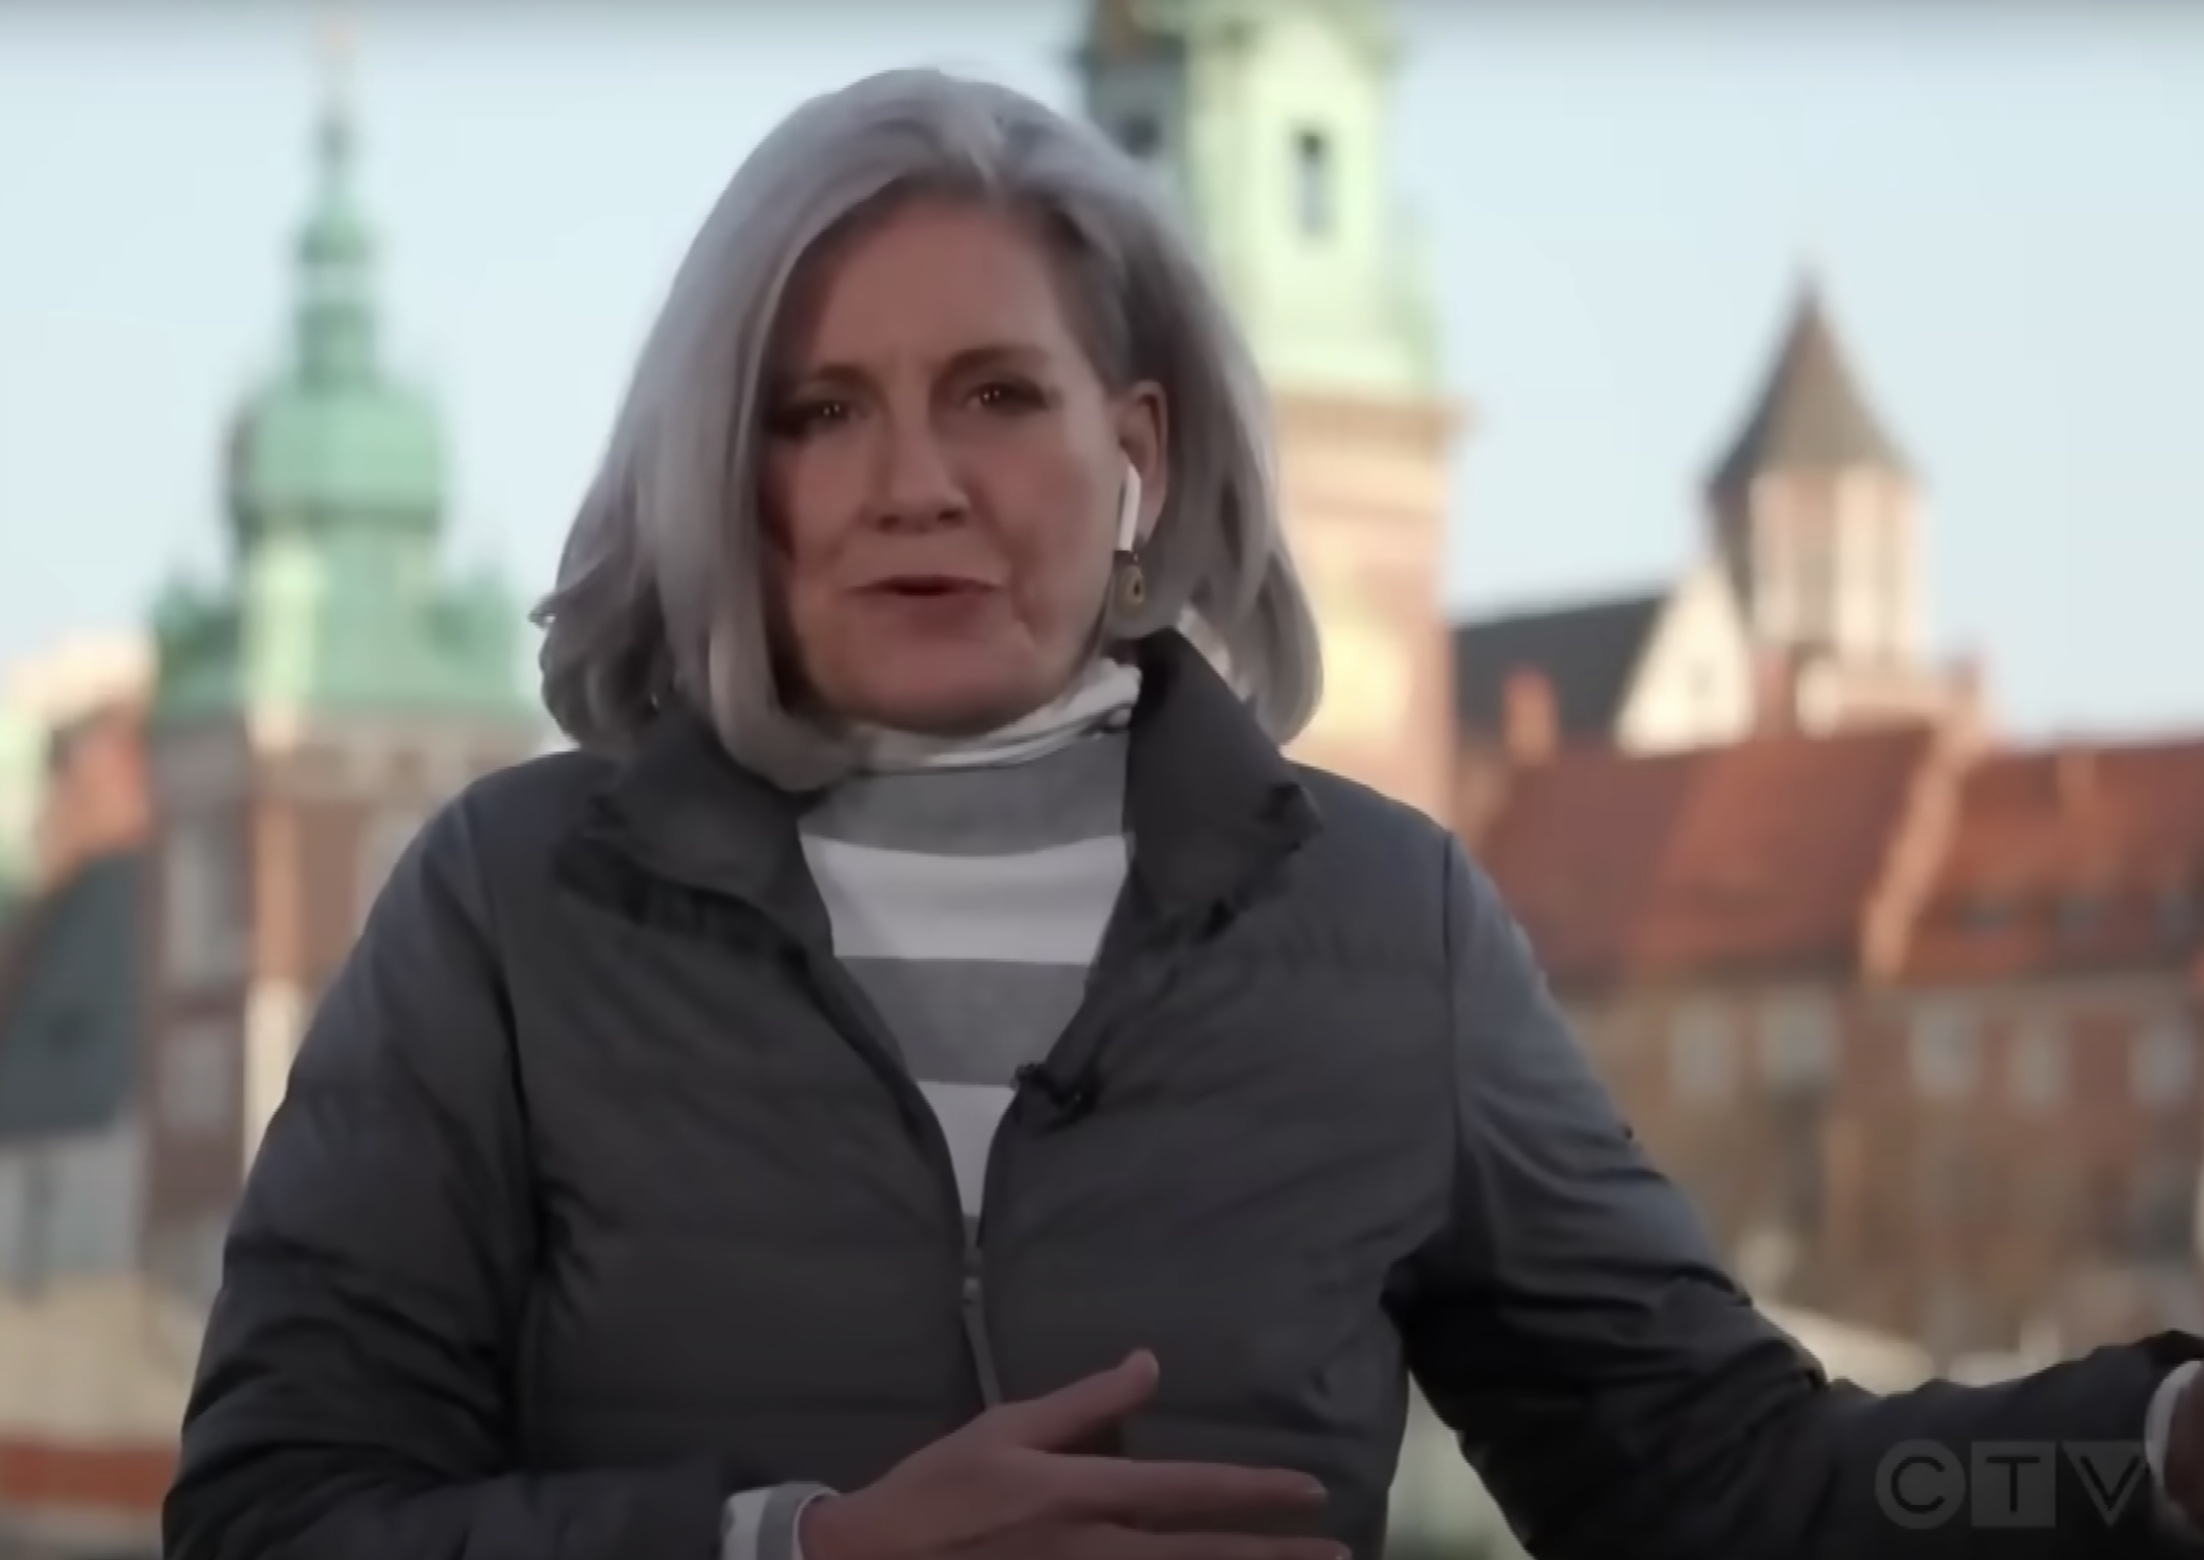 Lisa LaFlamme's white hair after confinement